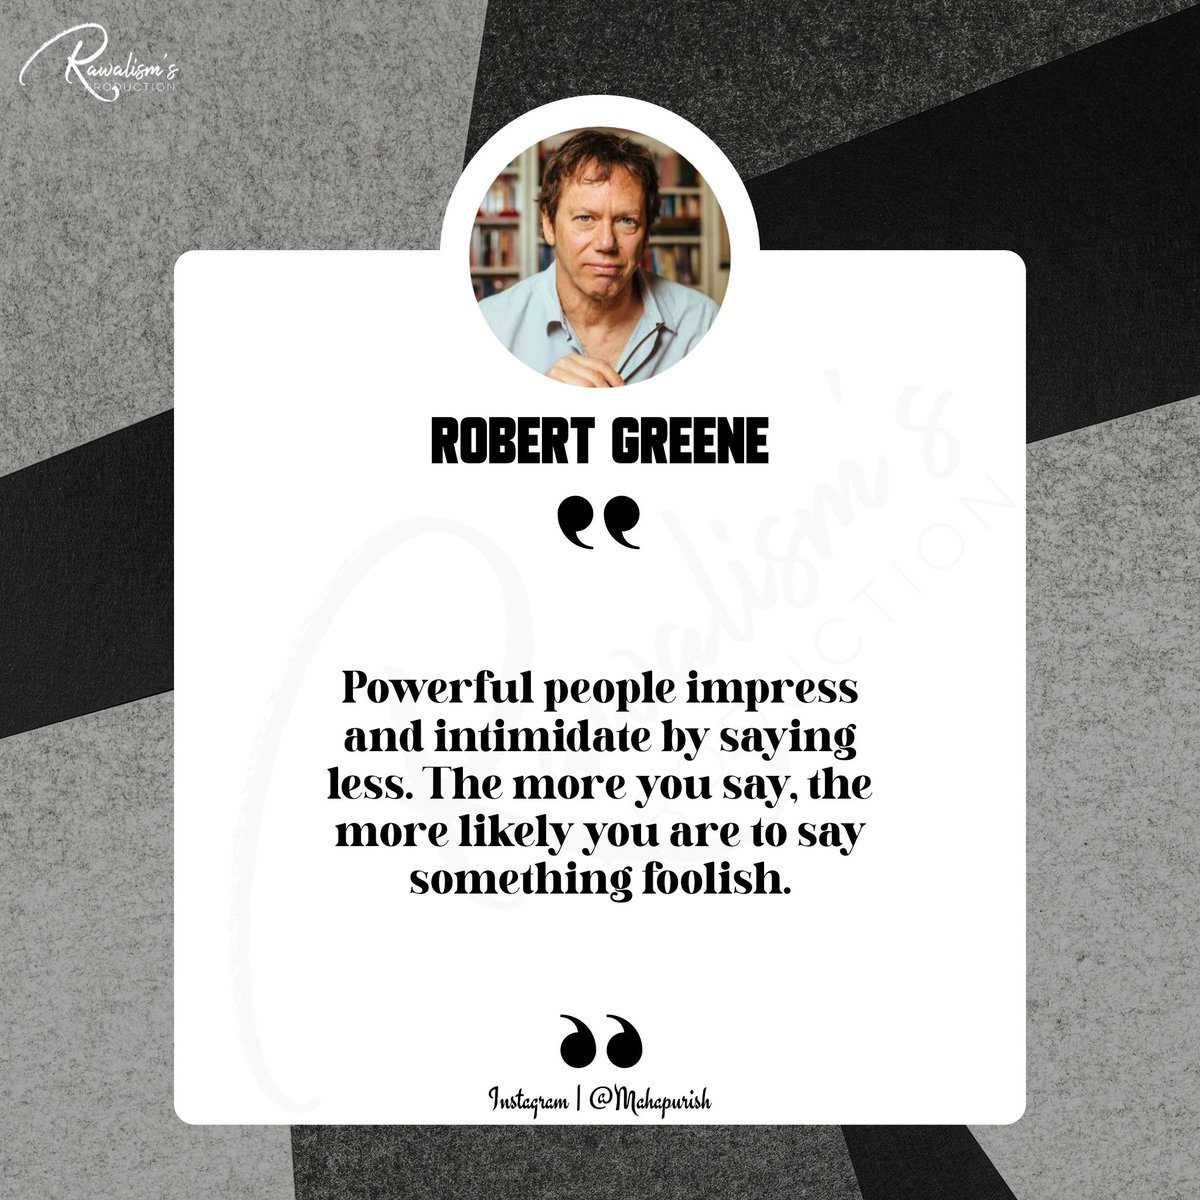 Quotes By Officials
Said by: Robert Greene
-
#quotes #robertgreene #quoteoftheday #instagramquotes #motivationalquotes #quotesdaily #robertgreenequotes #inspirationalquotes #robertgreenebooks #mahapurish #robertgreeneauthor #powerquotes #loveyourself #rawalism #lifequotes